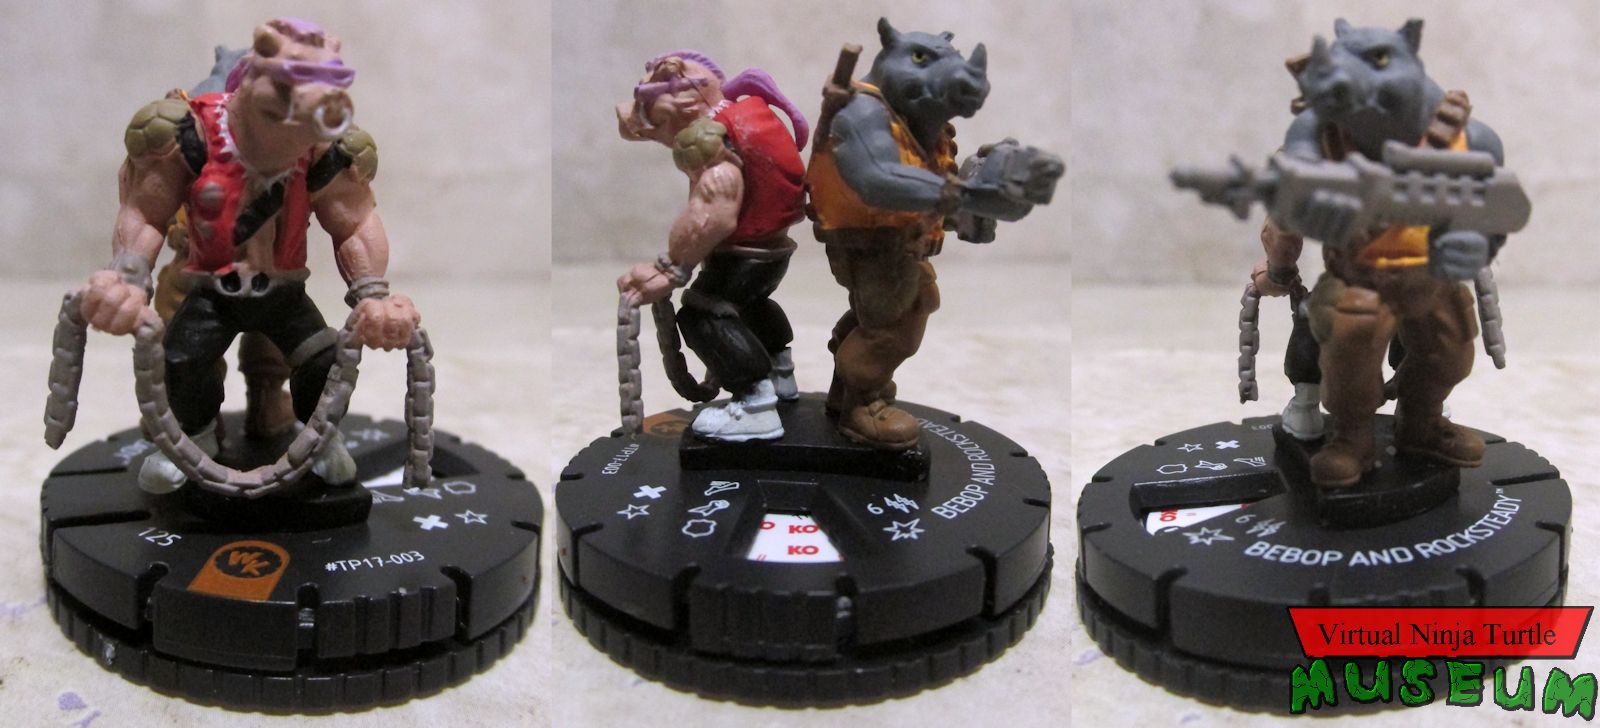 Bebop and Rocksteady Promo Figure front and back